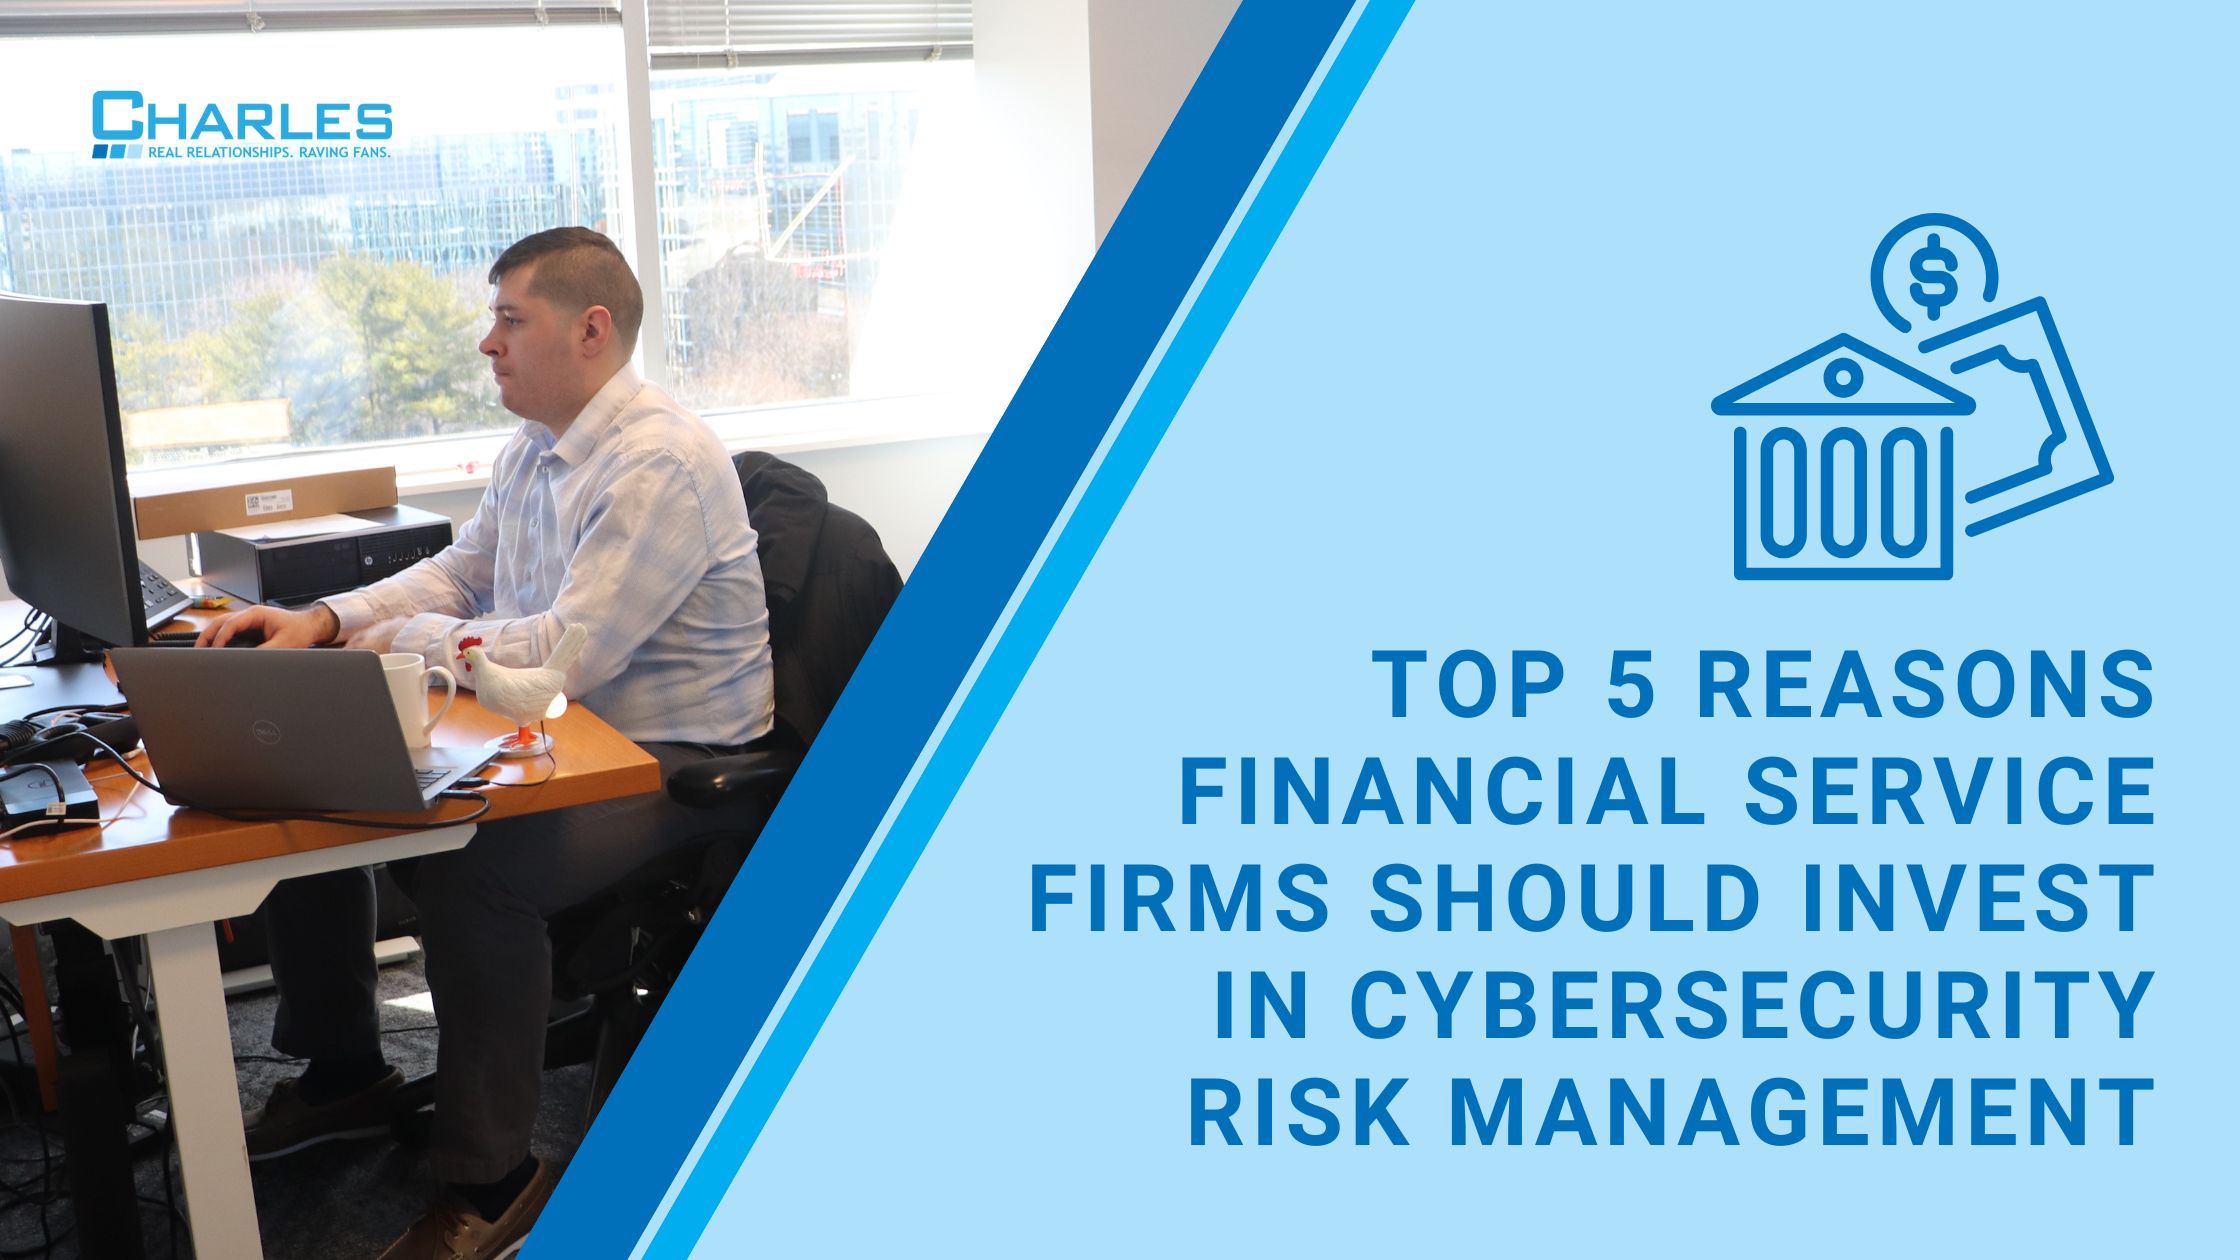 Top 5 Reasons Financial Service Firms Should Invest in Cybersecurity Risk Management